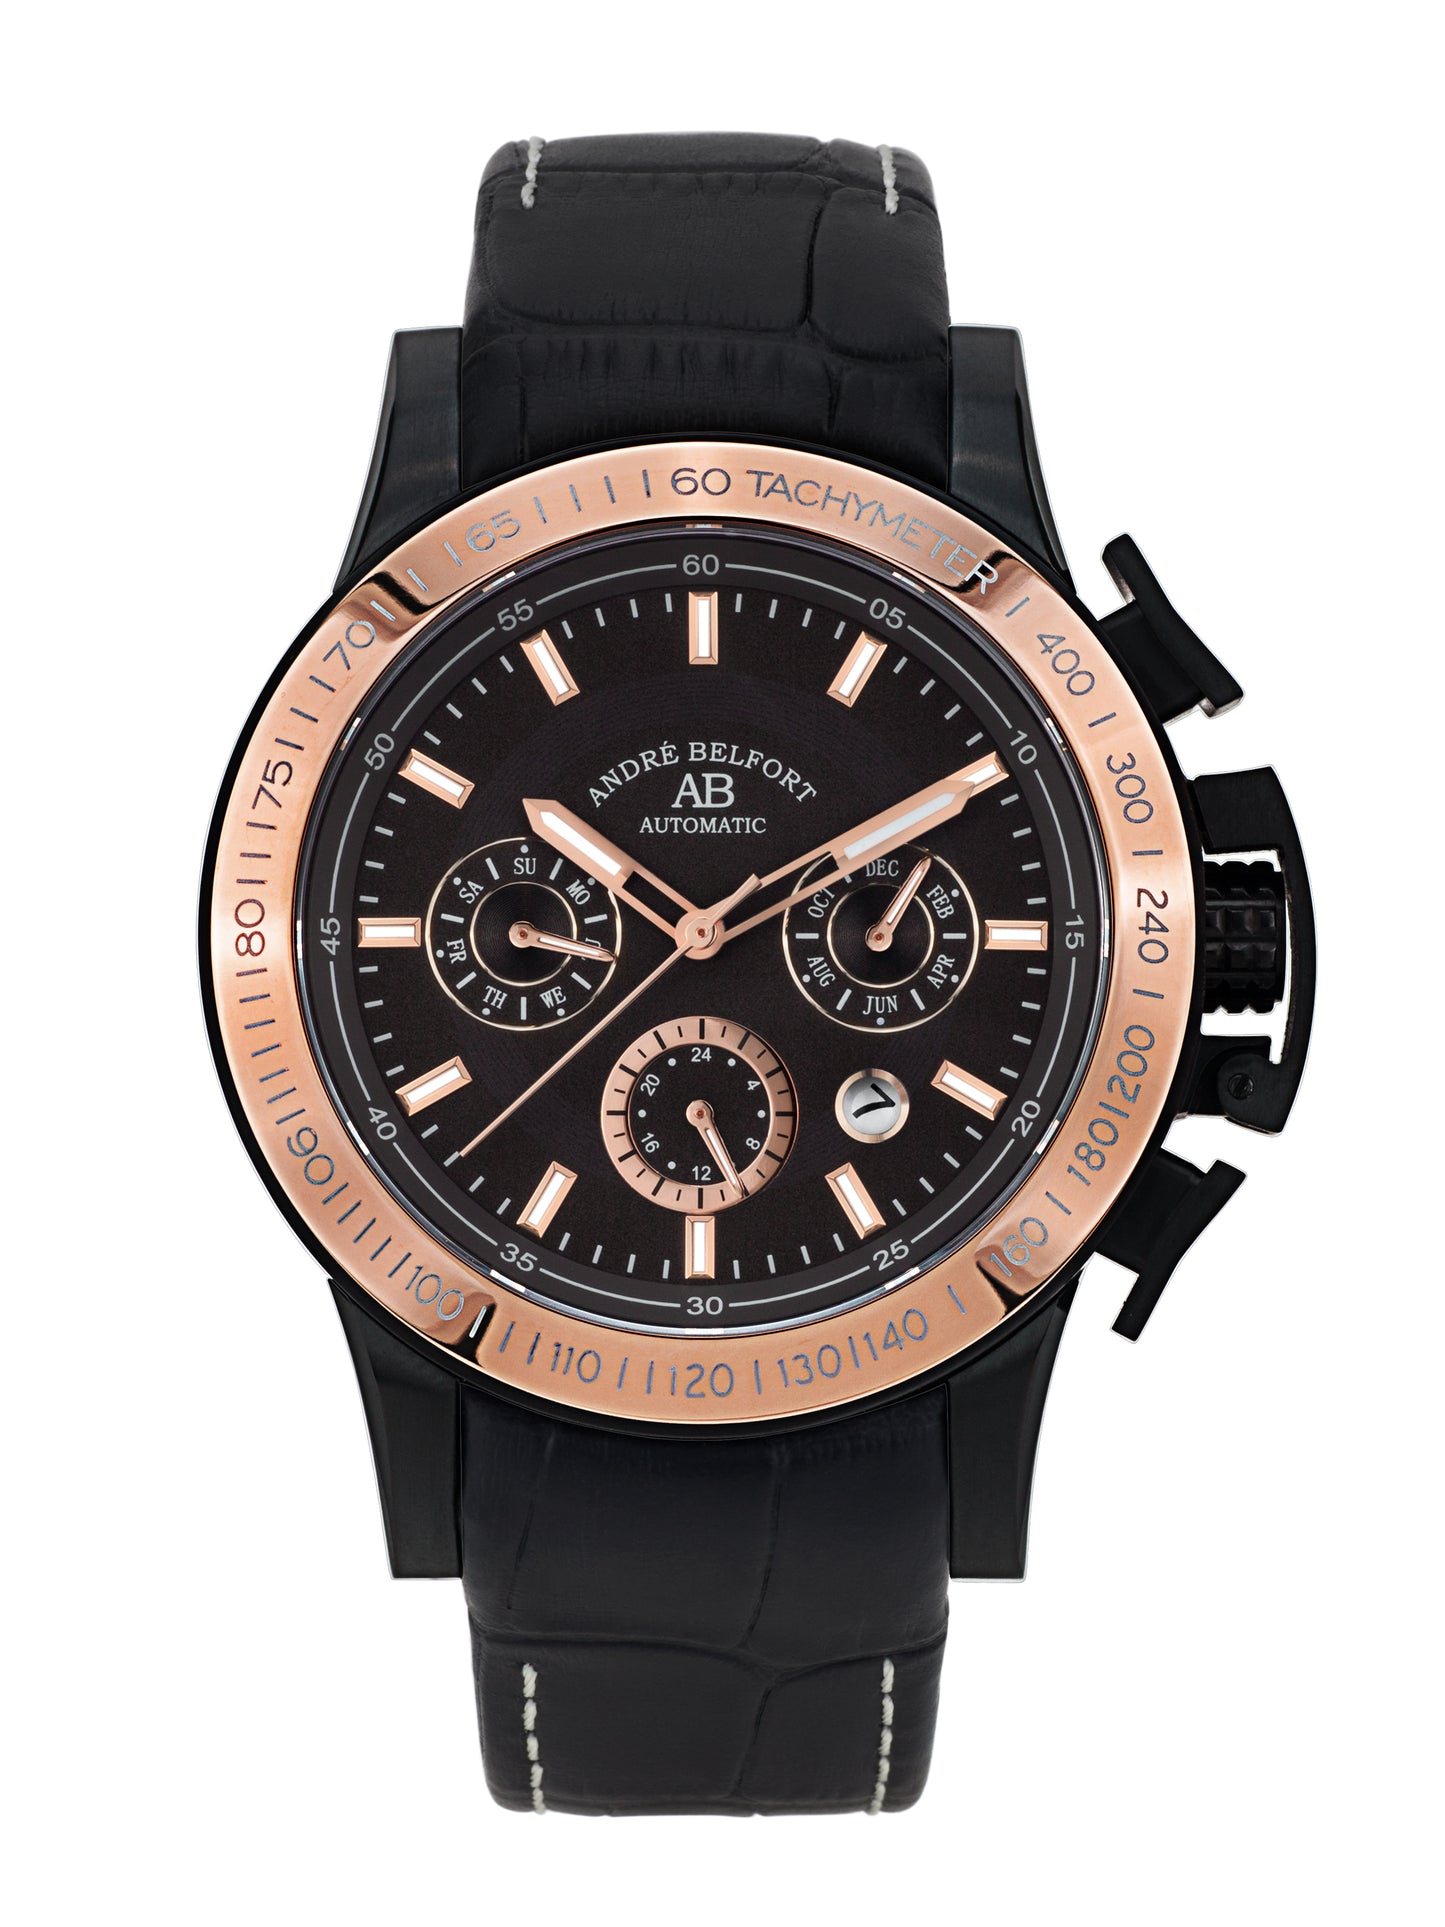 Automatic watches — Le Pilote — André Belfort — rosegold black